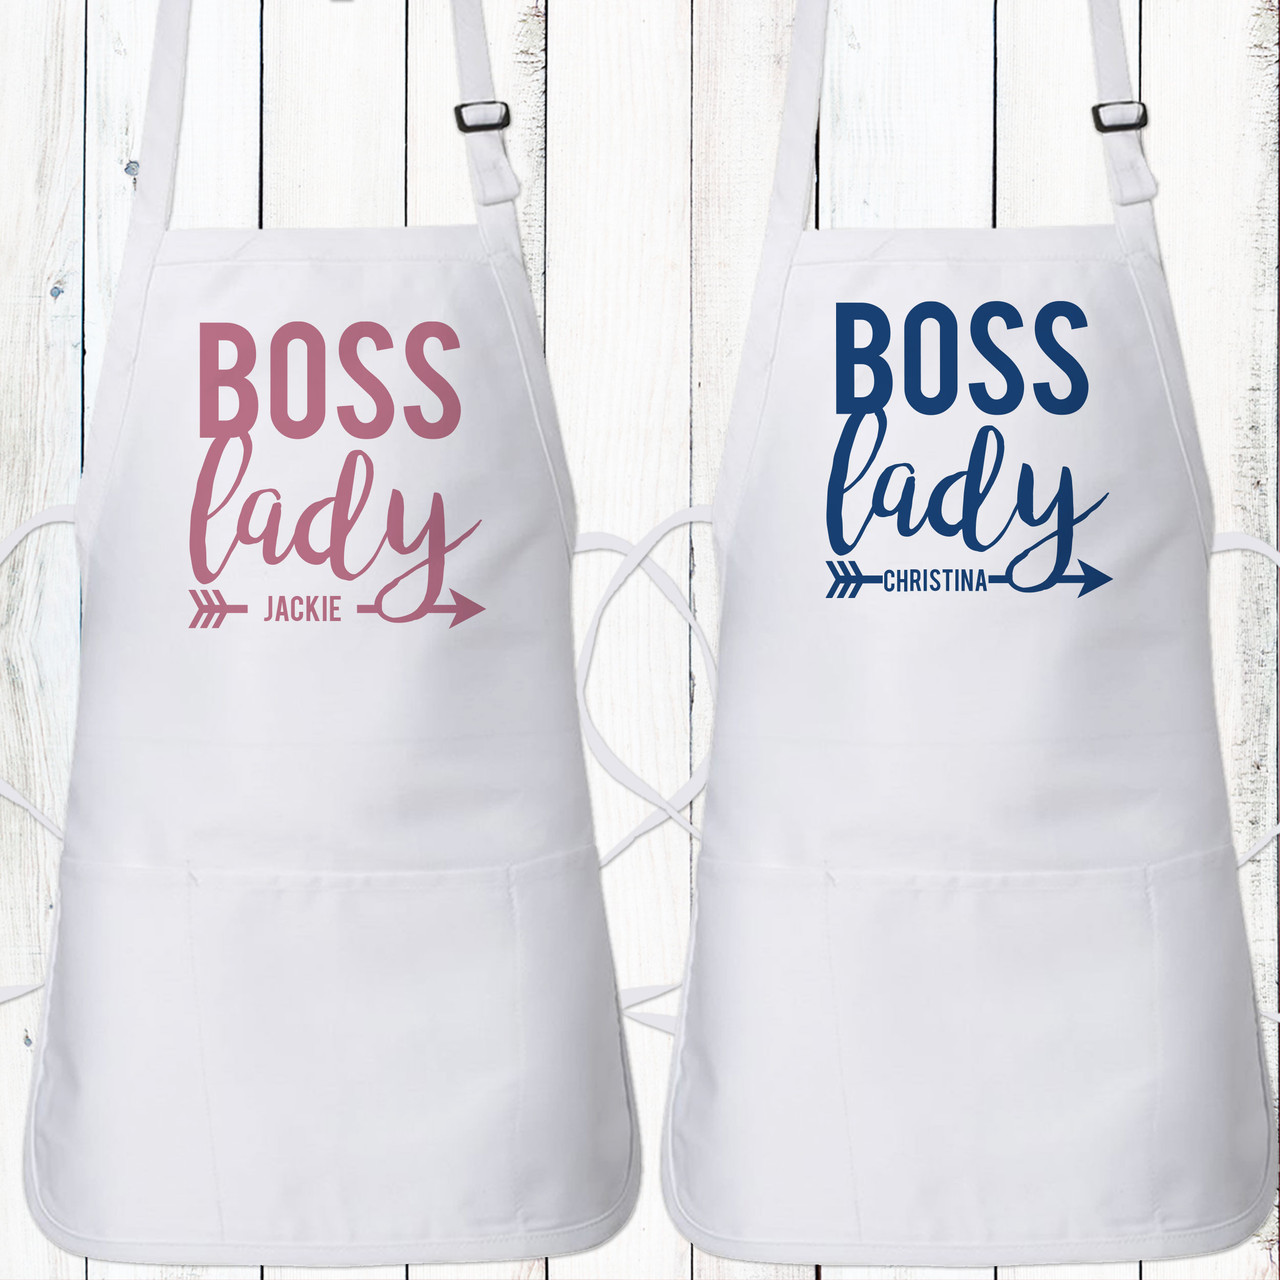 Apron Wife Mom Boss, Kitchen Apron With Three-section Pocket